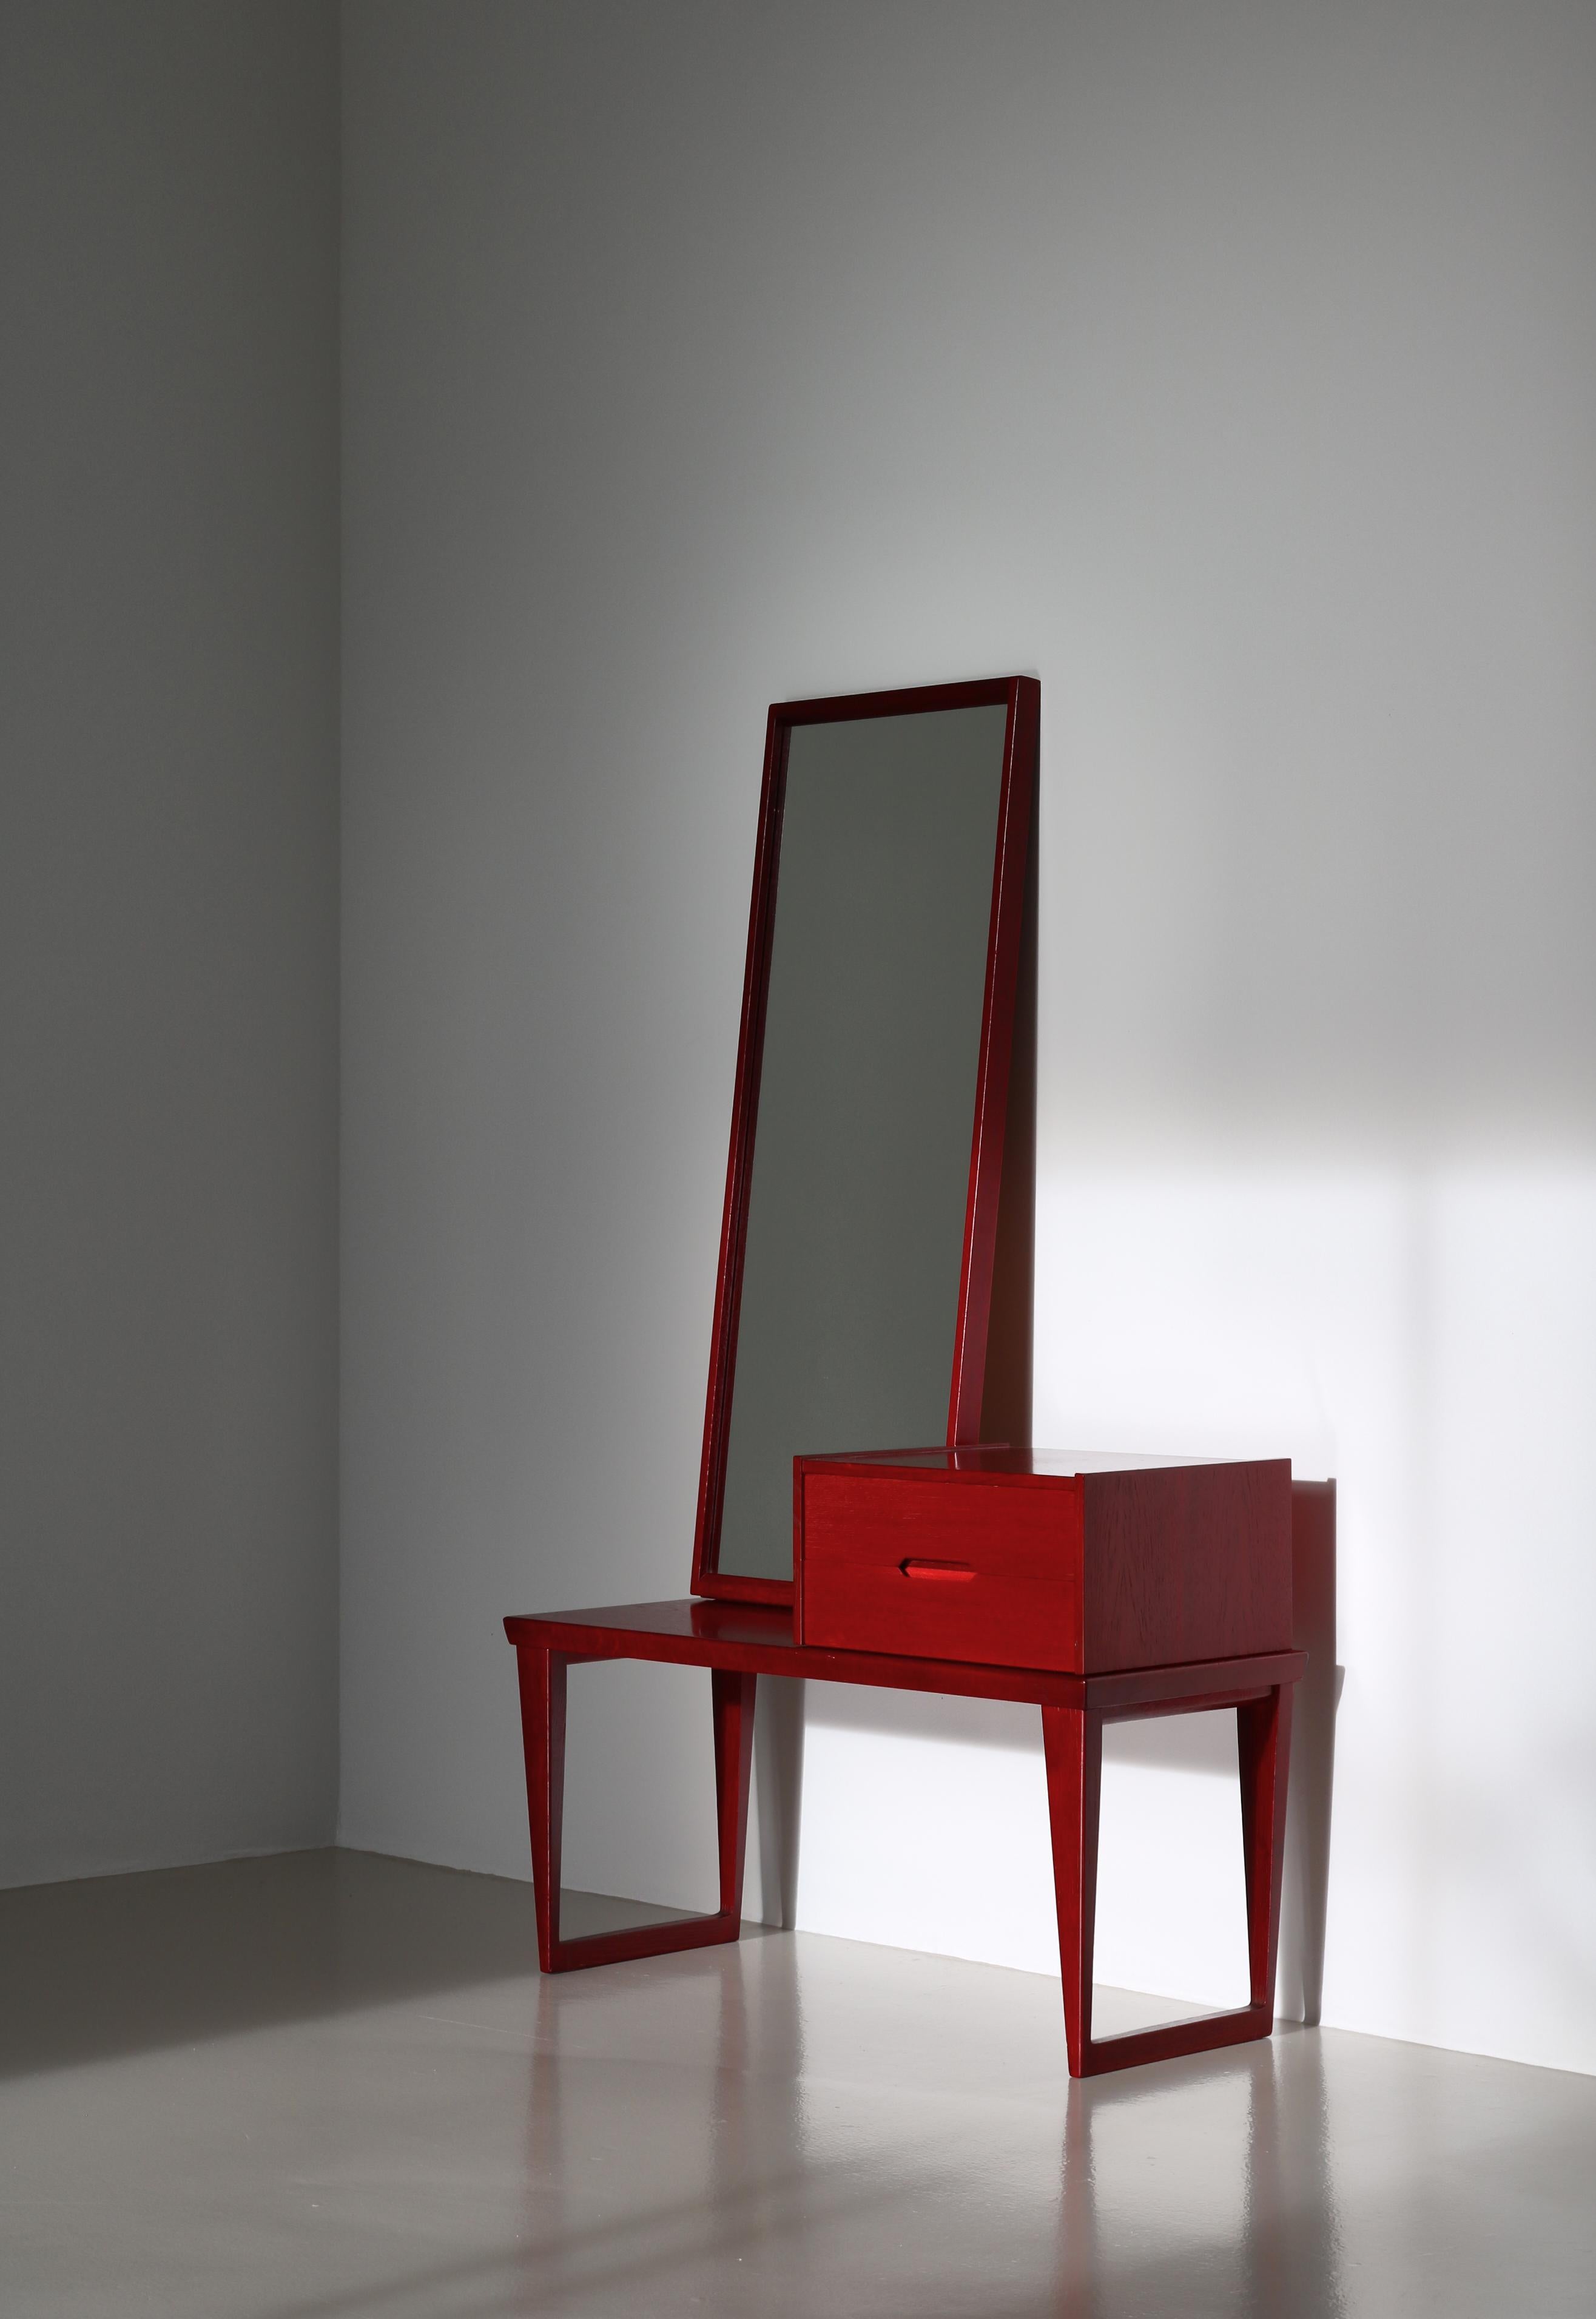 Rare Danish Modern hallway set consisting of a bench, a mirror and a small chest of drawers all designed by Kai Kristiansen in the 1960s.. This example is made of red stained oak and is very rarely seen. It was manufactured in small numbers by Aksel